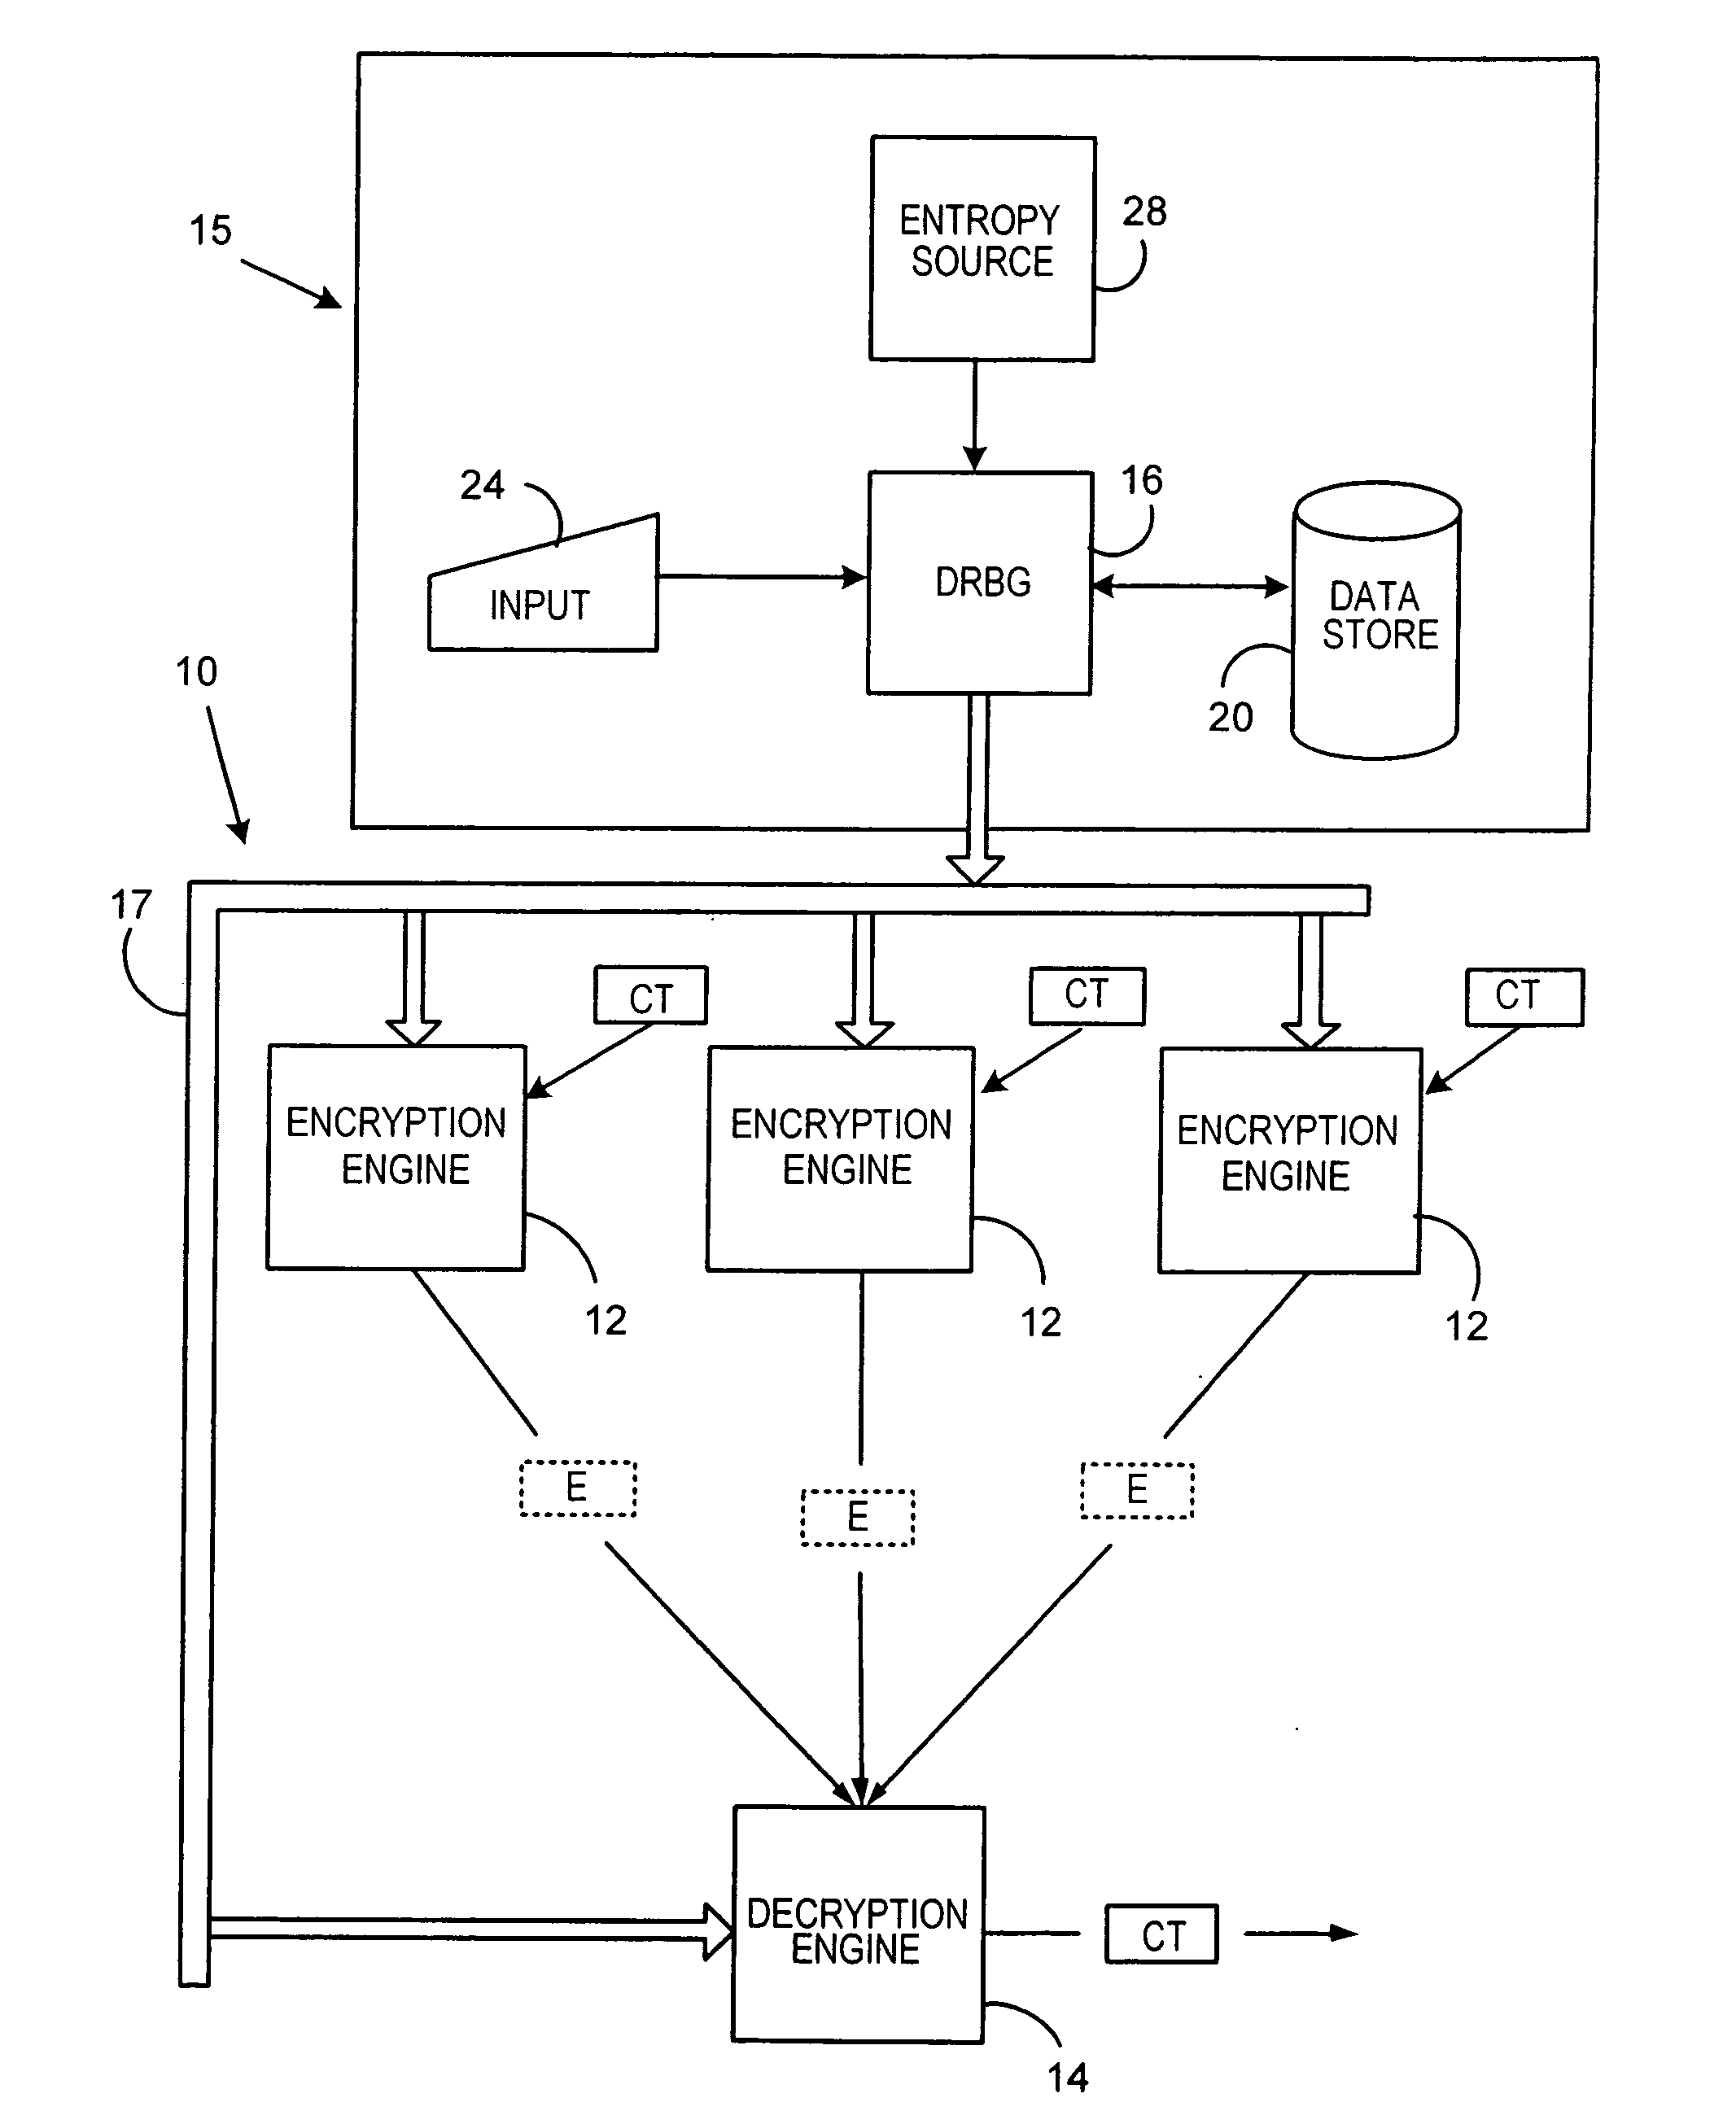 Method and system for generation of cryptographic keys for use in cryptographic systems